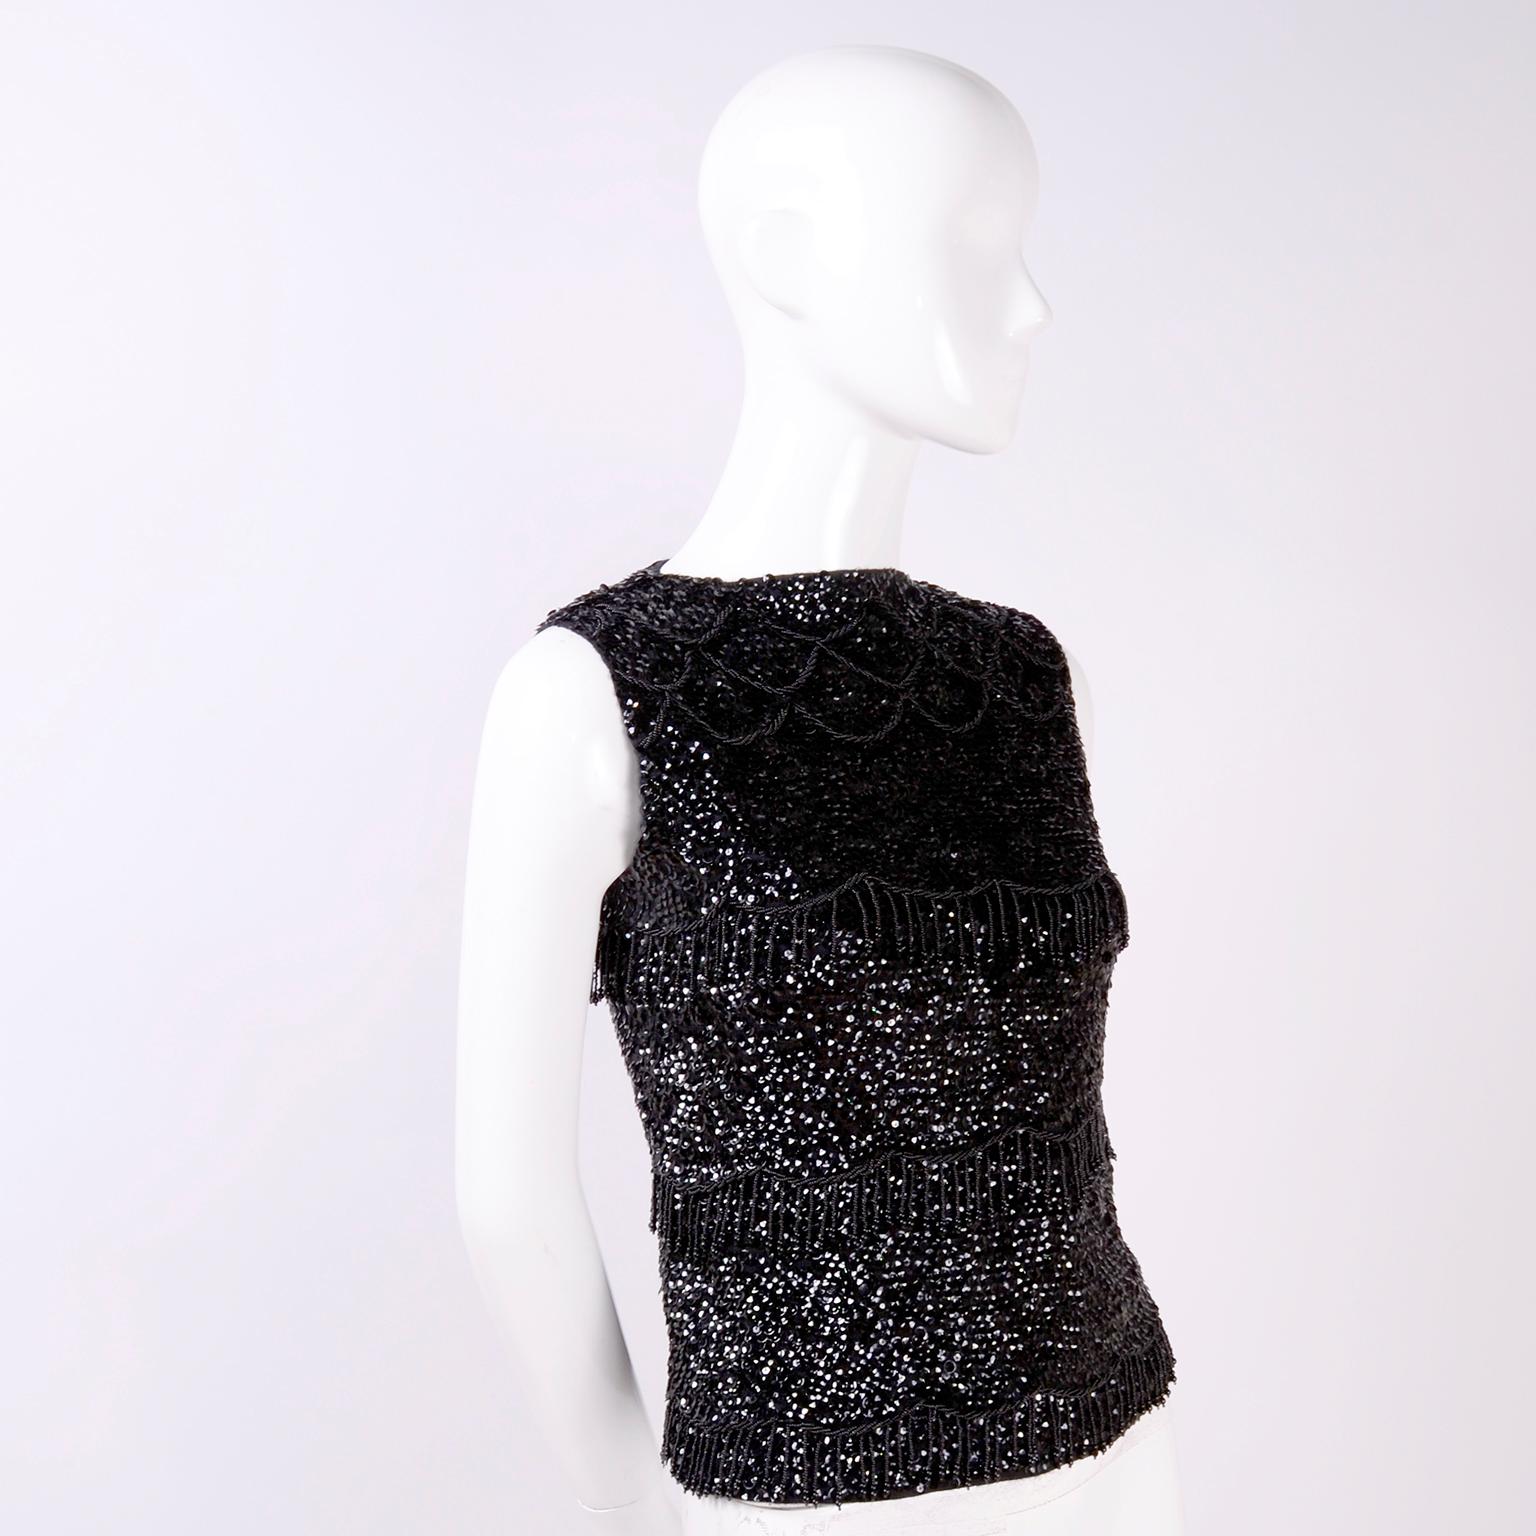 1960s Black Beaded Vintage Top With Fringe Made in Hong Kong For Sale ...